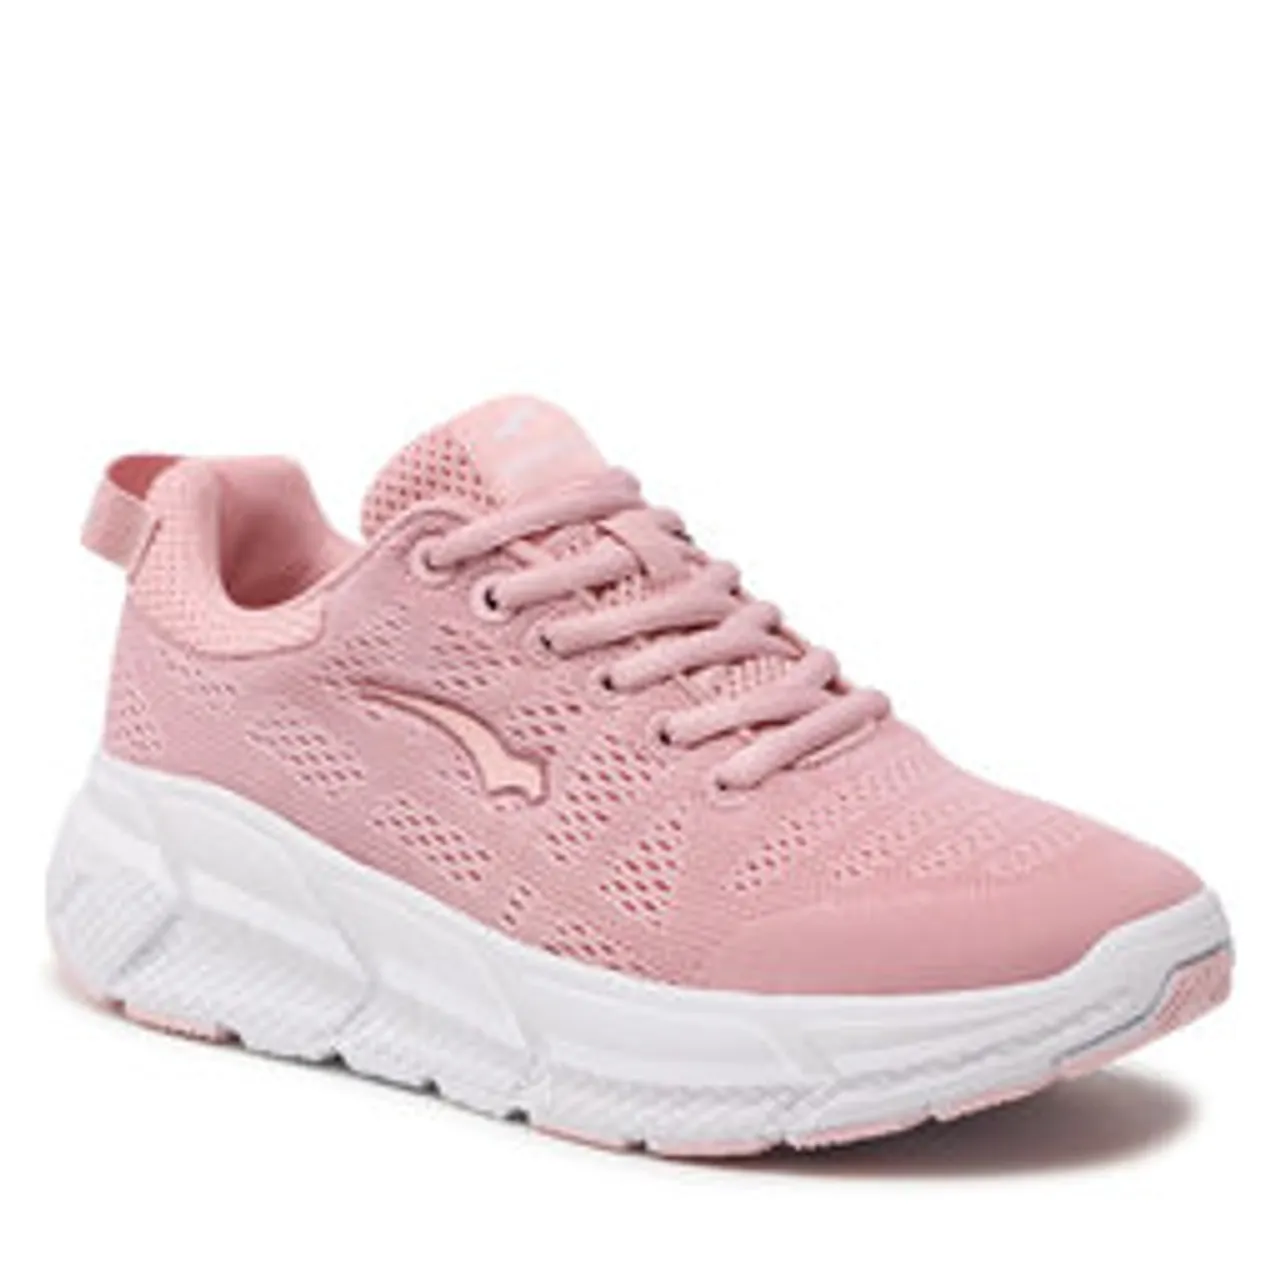 Sneakers Bagheera Eclipse 86537-34 C3908 Soft Pink/White